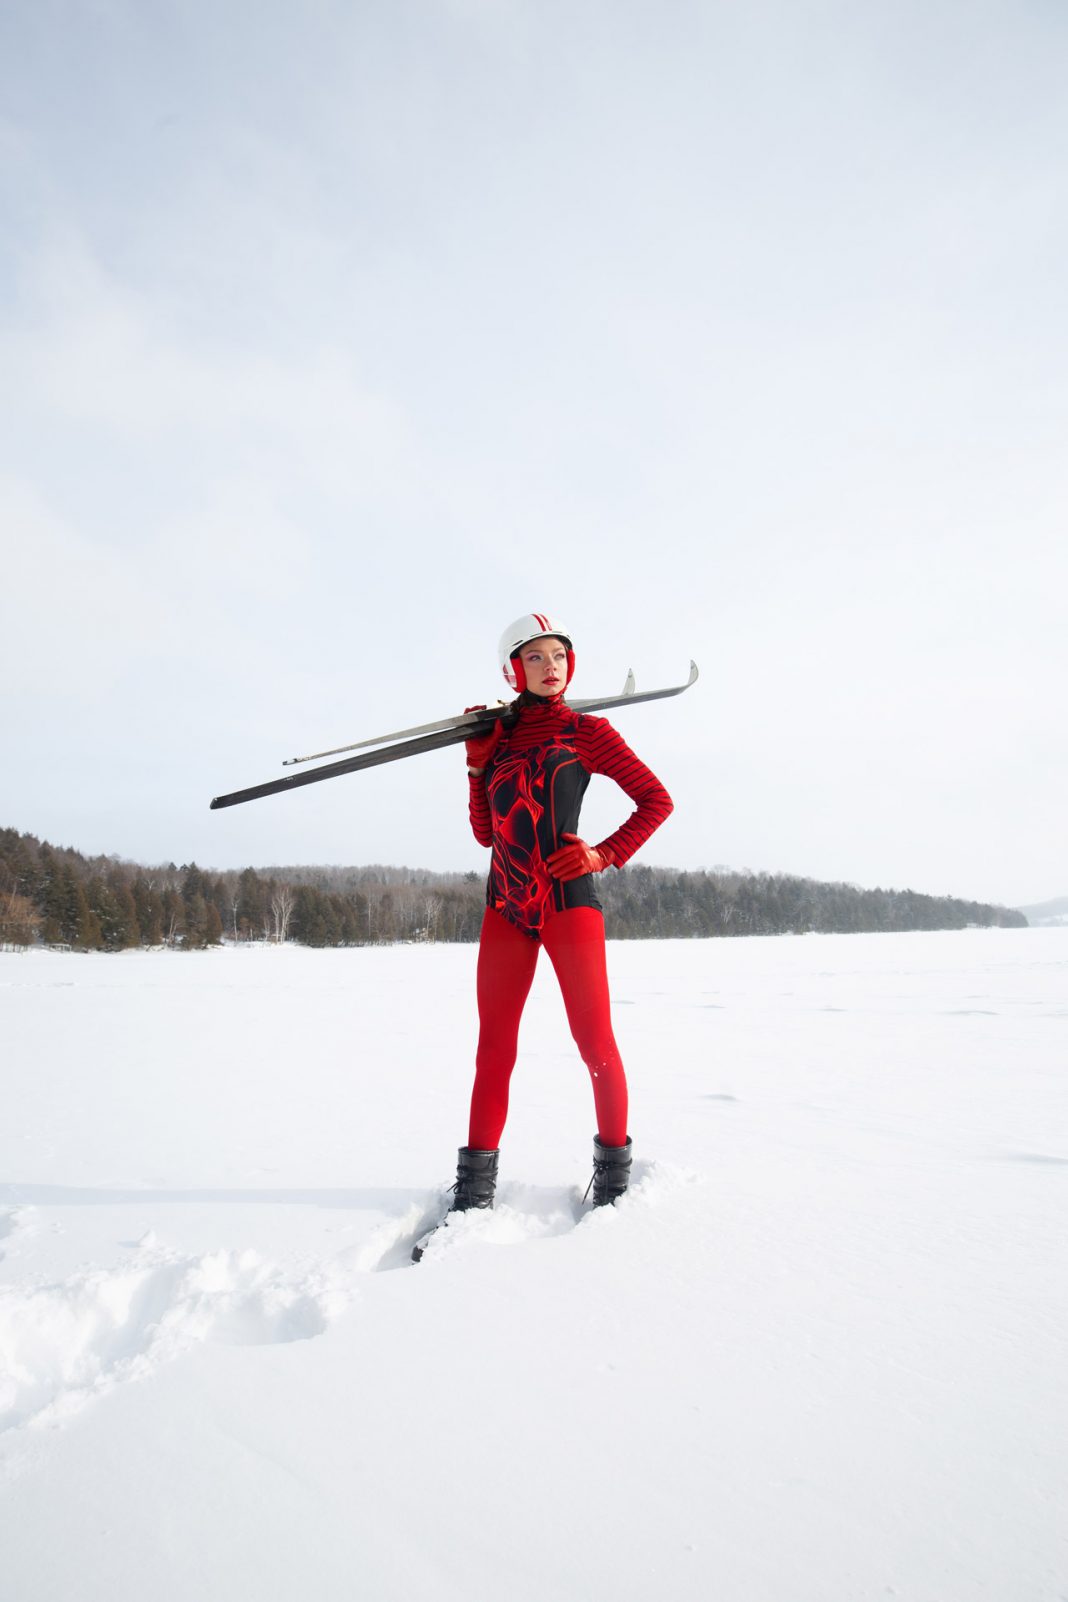 Snow Time: Ski & Winter Inspired Fashion Photography by Florine Pellachin